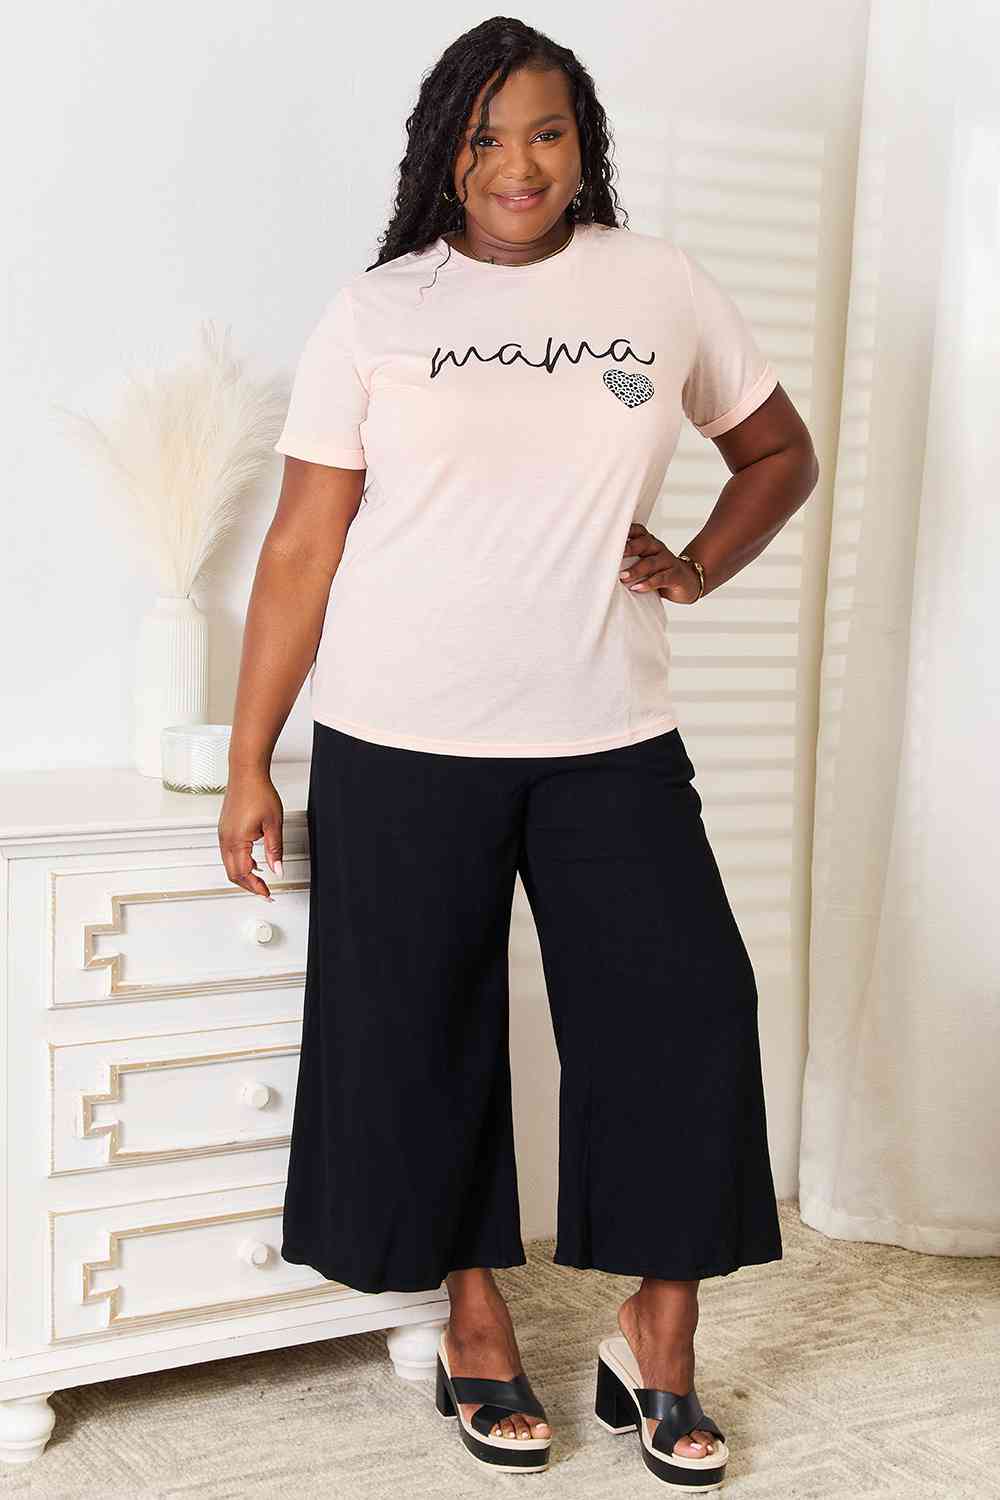 Simply Love MAMA Heart Graphic T-Shirt - GemThreads Boutique